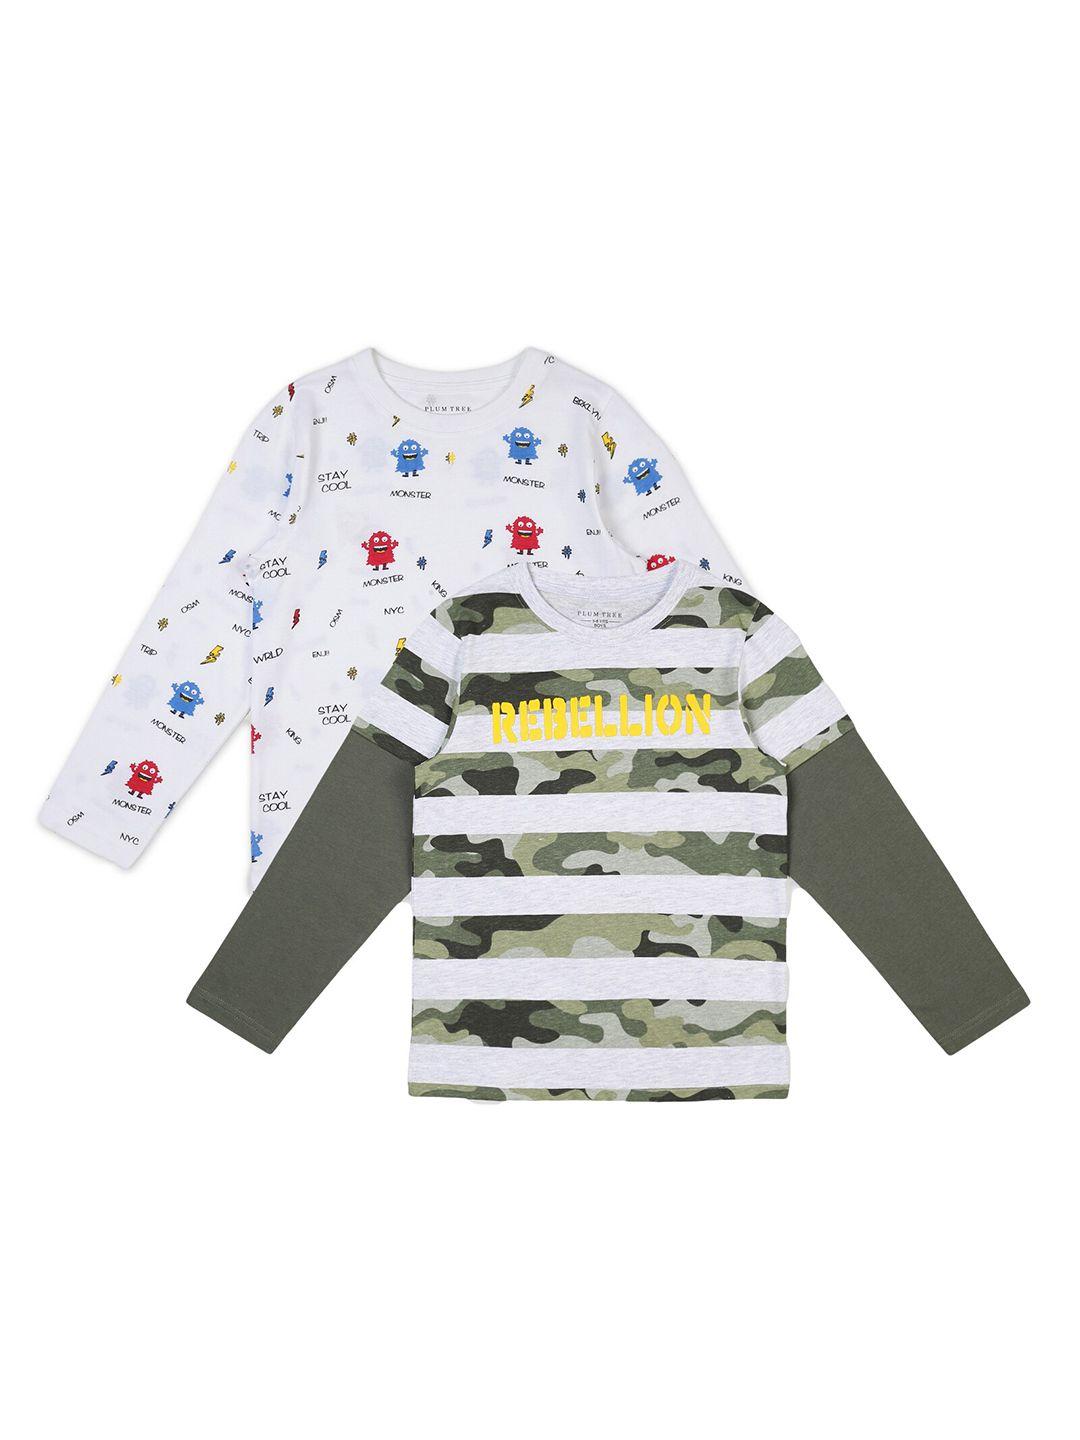 plum-tree-boys-pack-2-off-white--olive-green-printed-pure-cotton-t-shirt